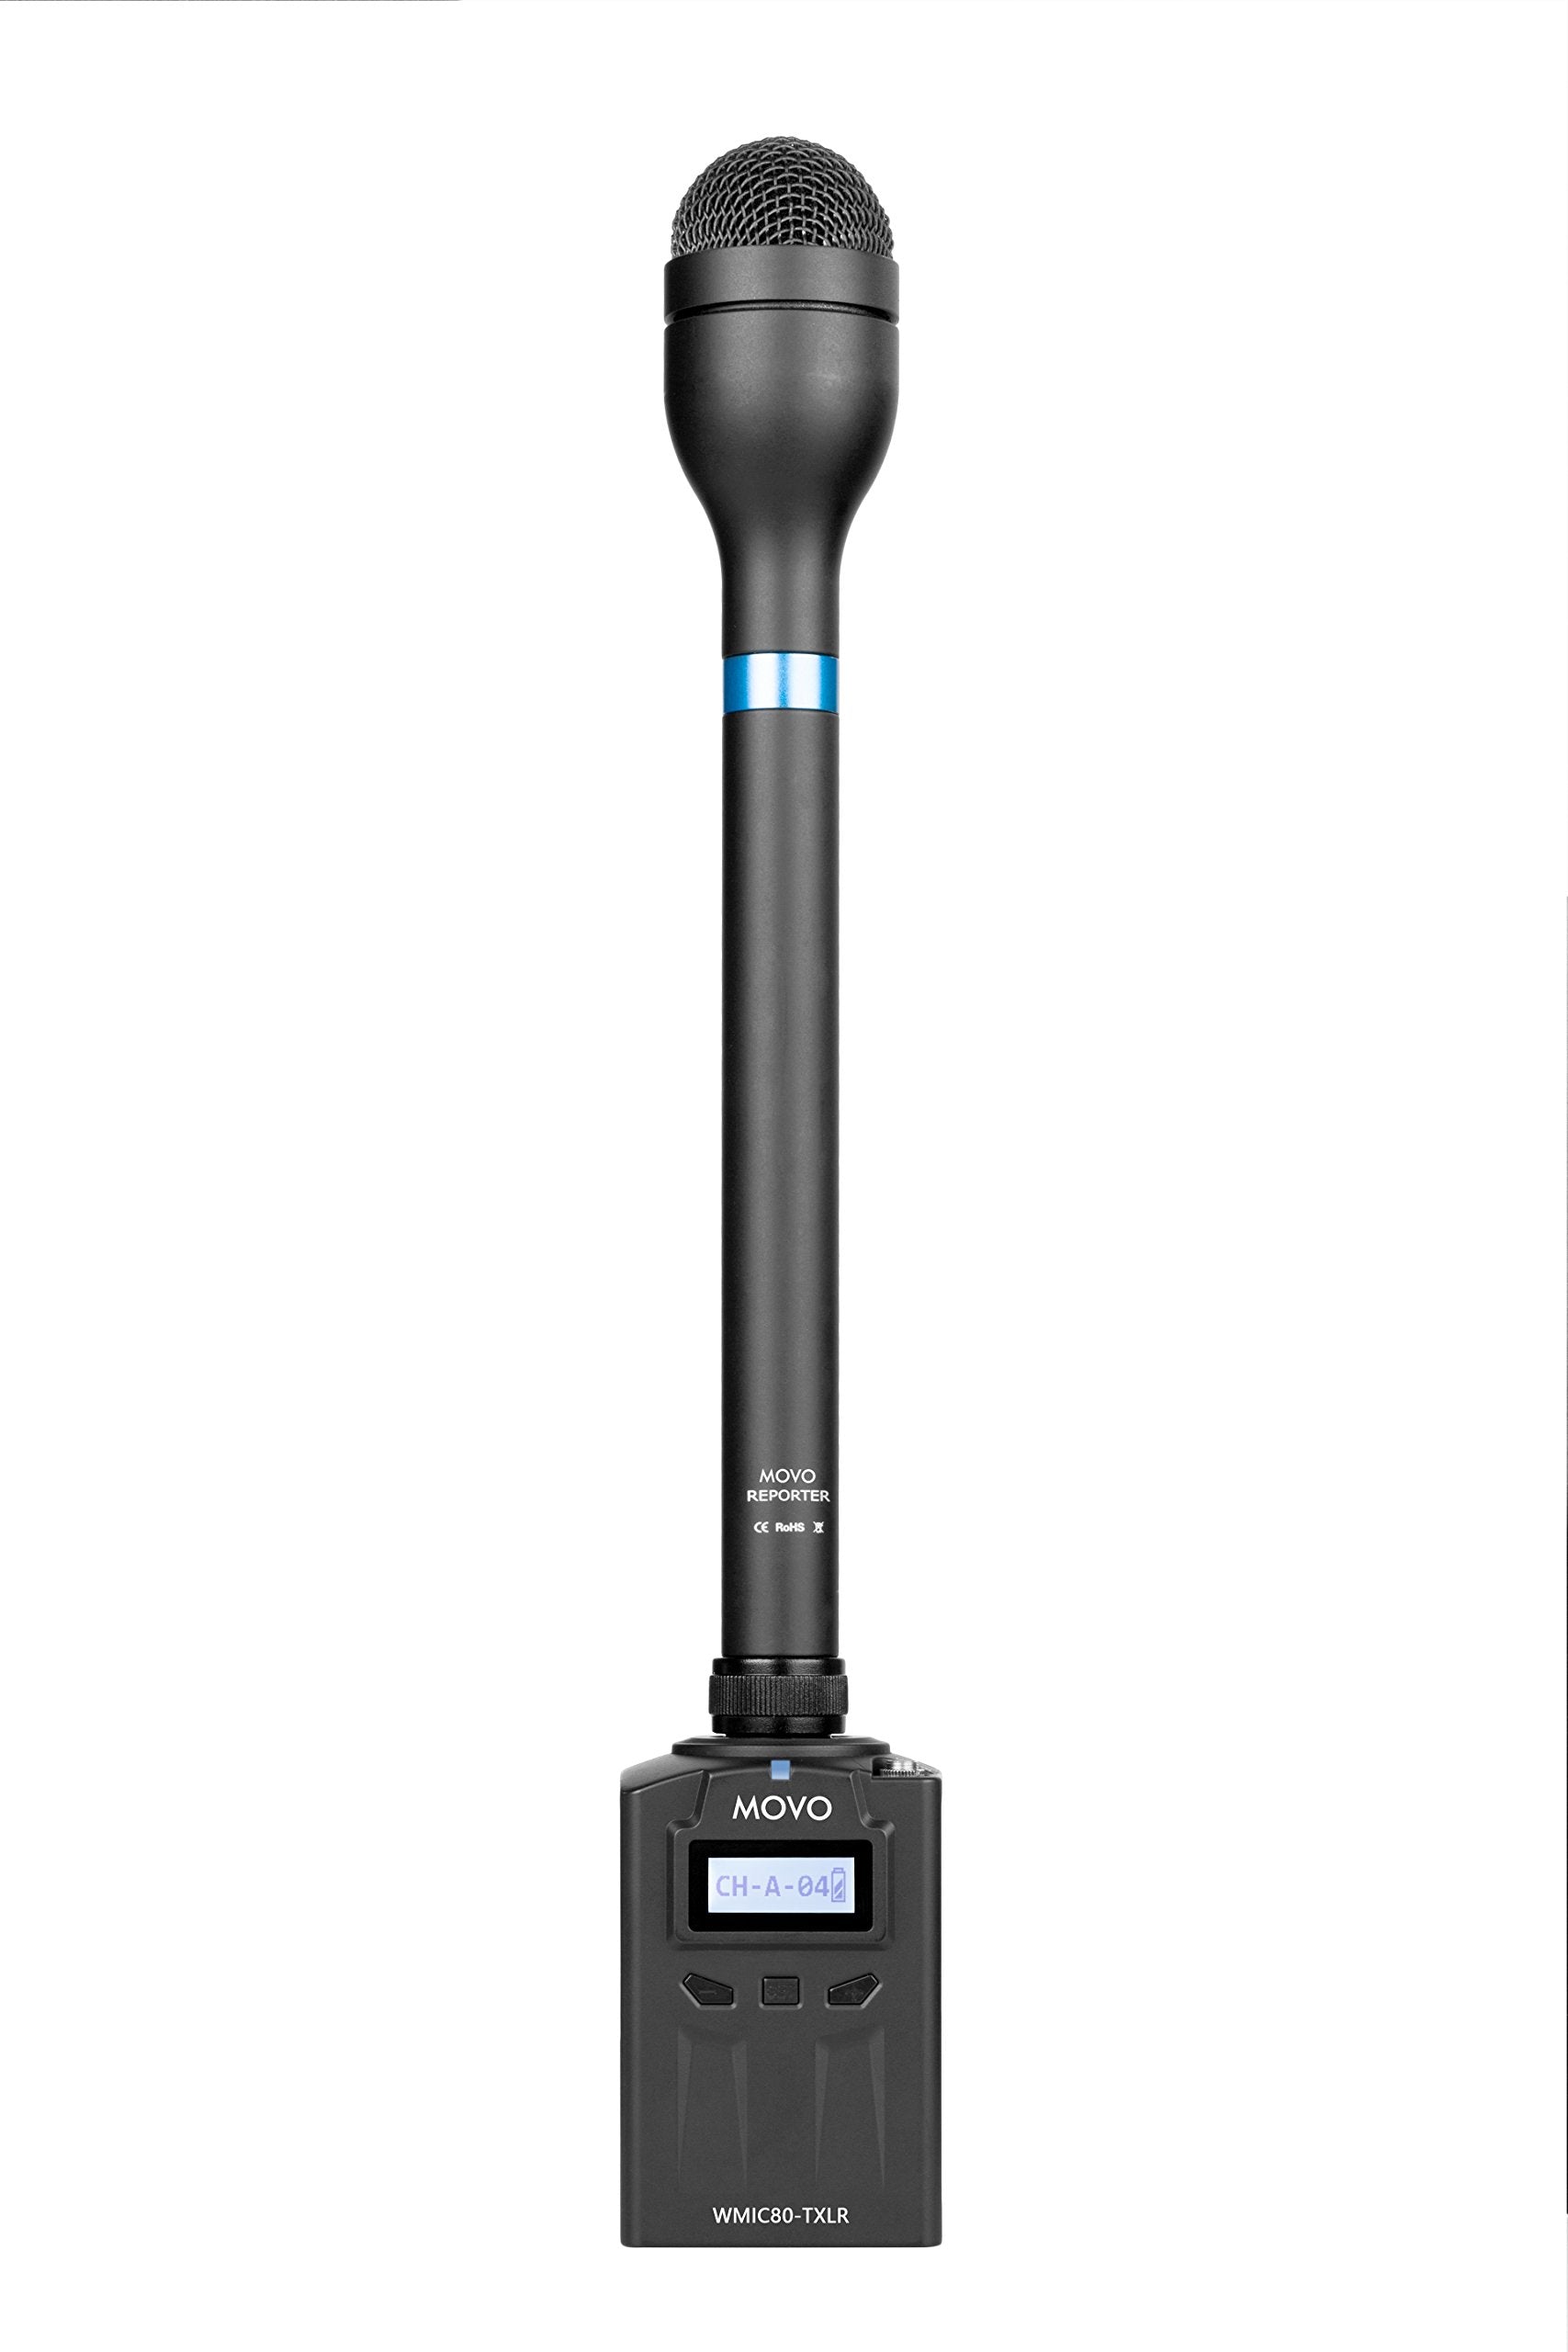 Movo WXLR8 48-Channel UHF Wireless XLR Plug-in Microphone Transmitter for The WMIC80 Wireless System  - Like New